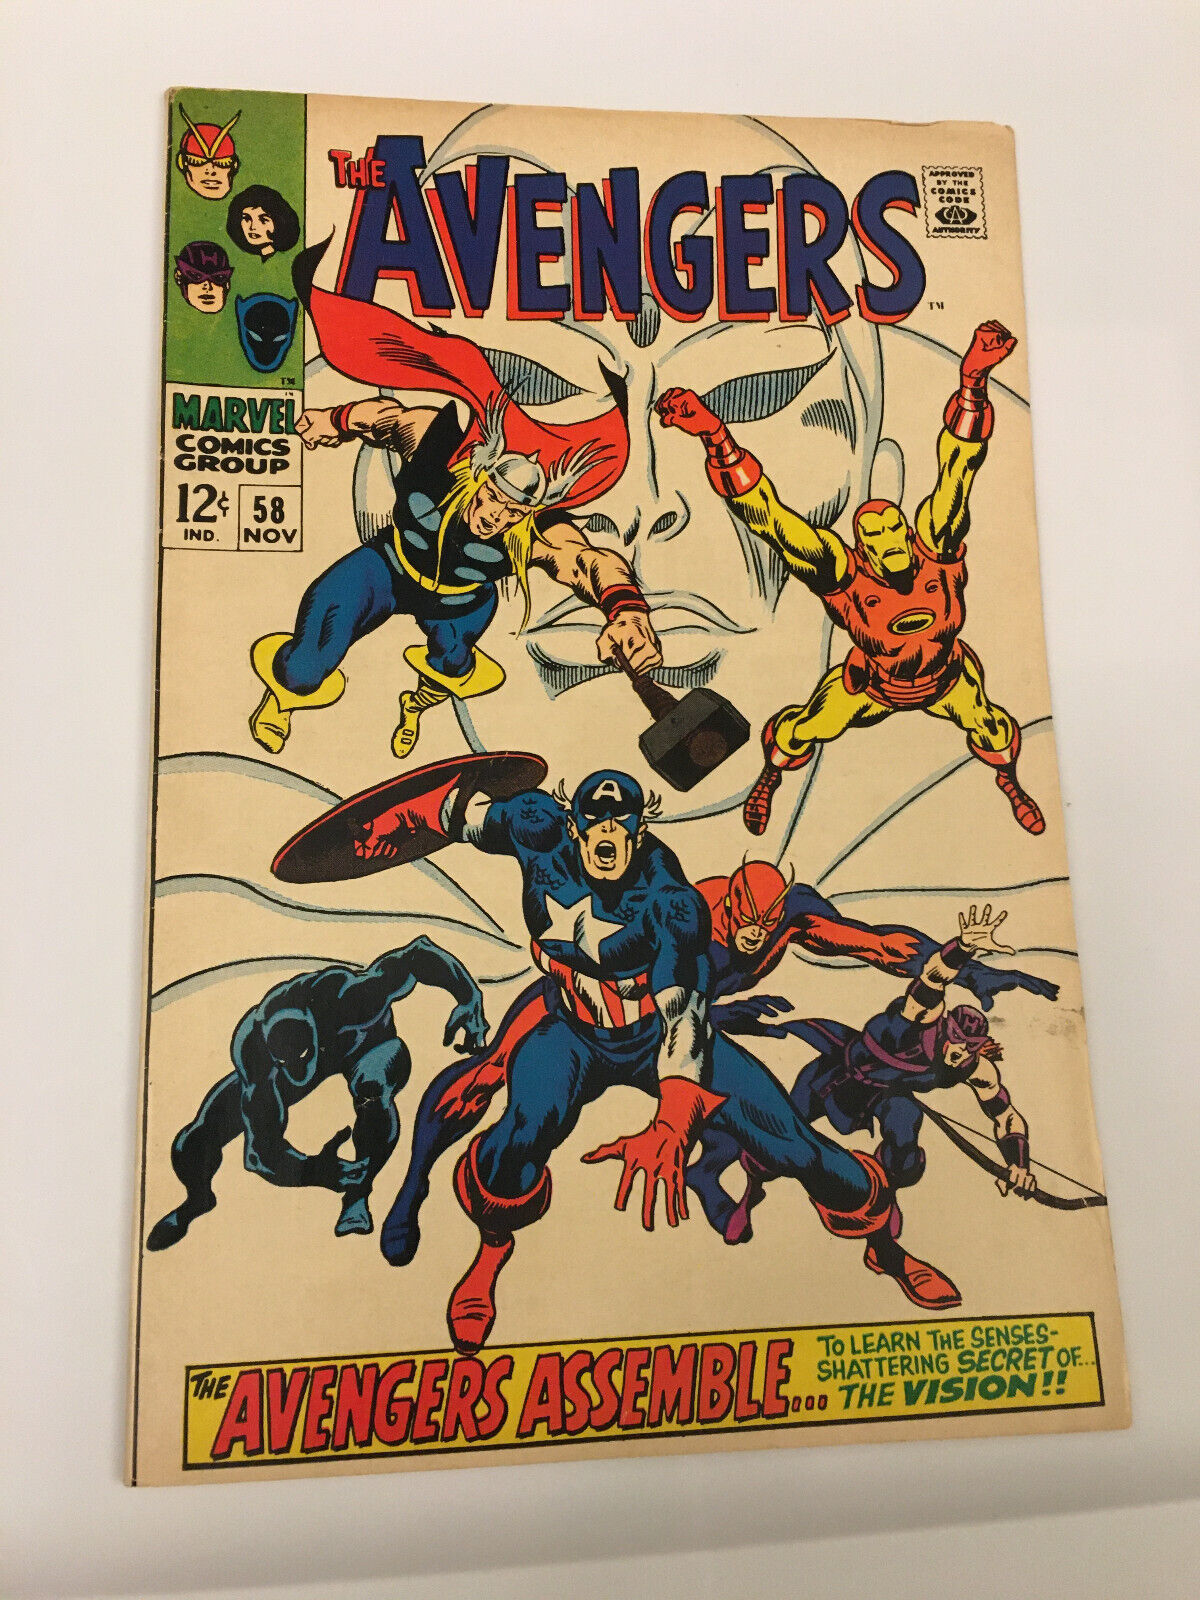 The Avengers Comic #58 NOT CGC GREAT TO ADD TO YOUR MARVEL COLLECTION